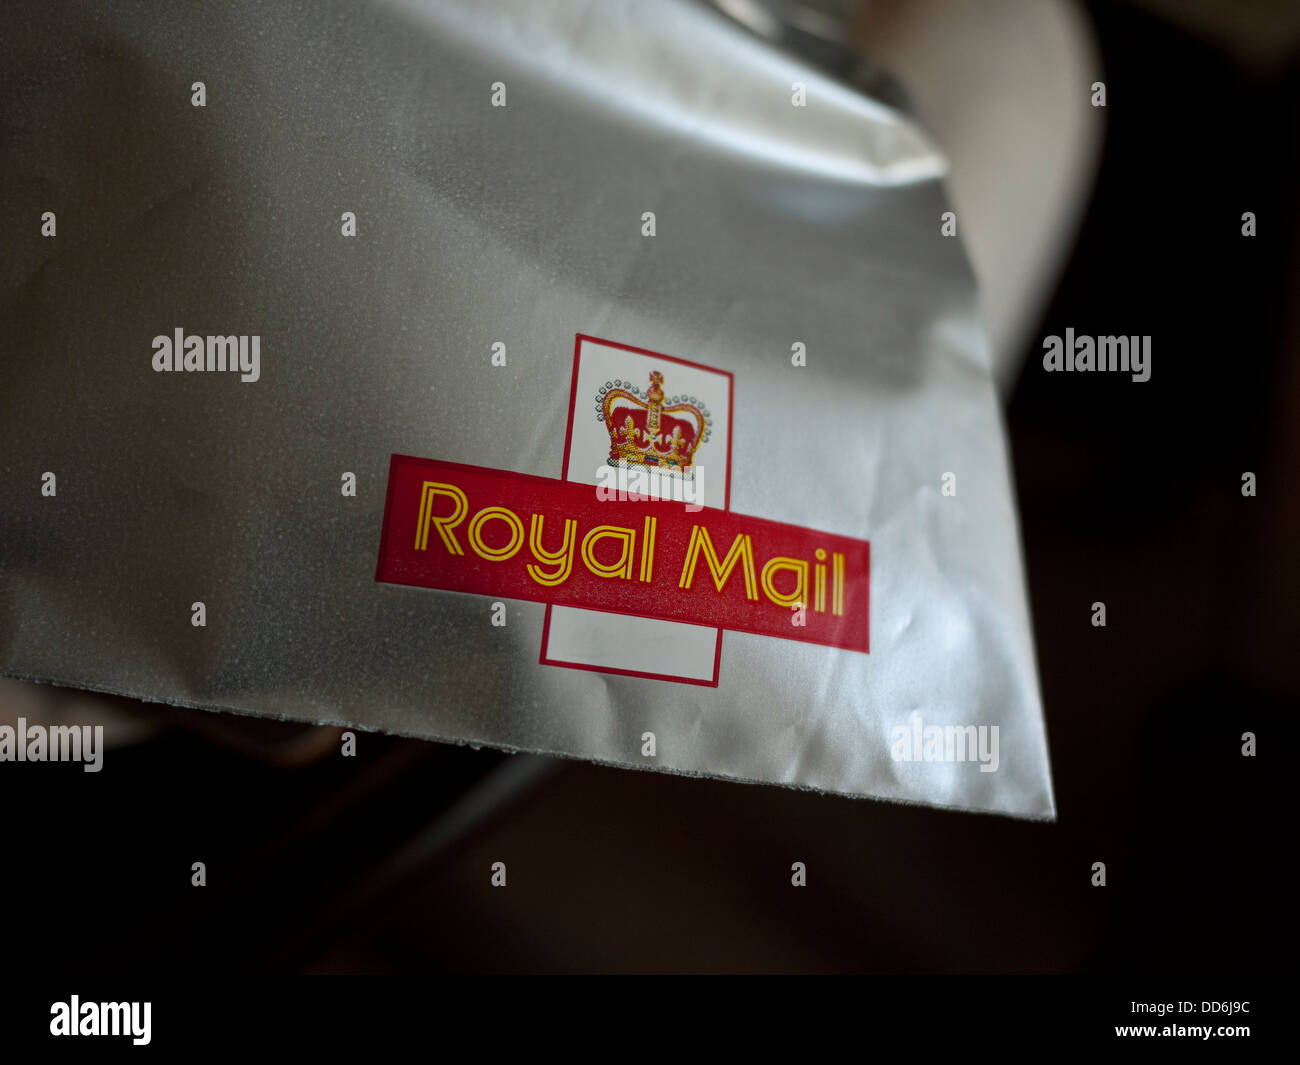 Royal Mail Special Delivery guaranteed next day delivery. Stock Photo